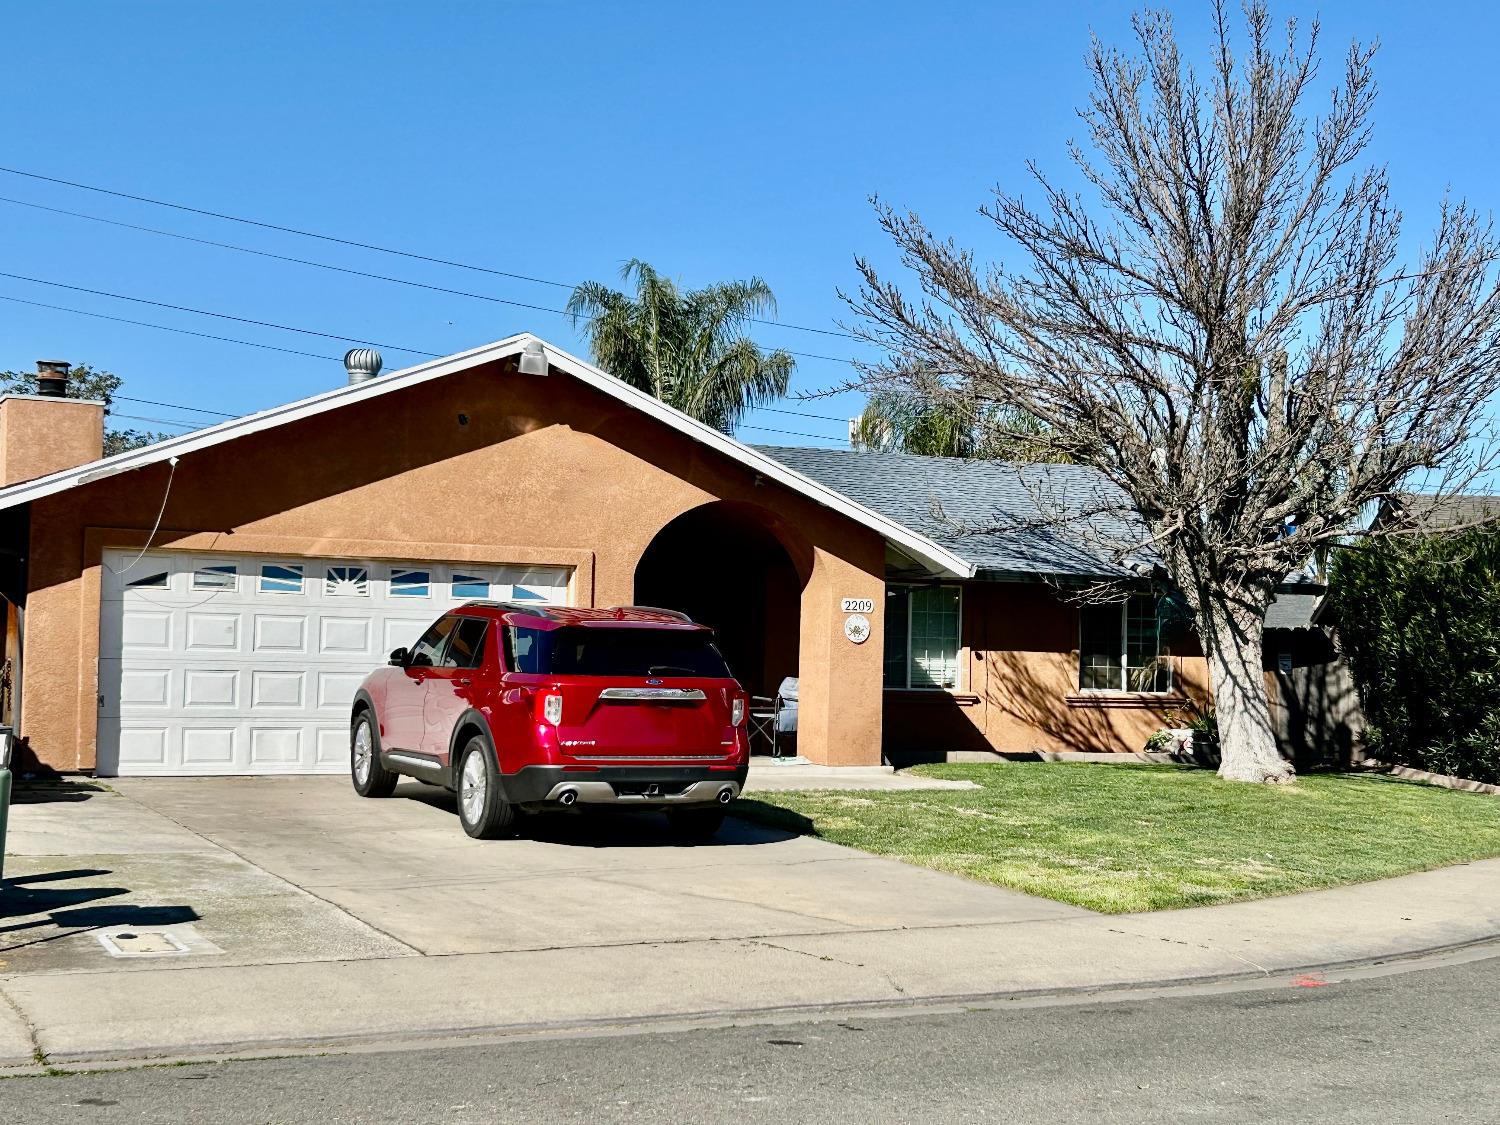 Photo of 2209 Trina Ln in Ceres, CA